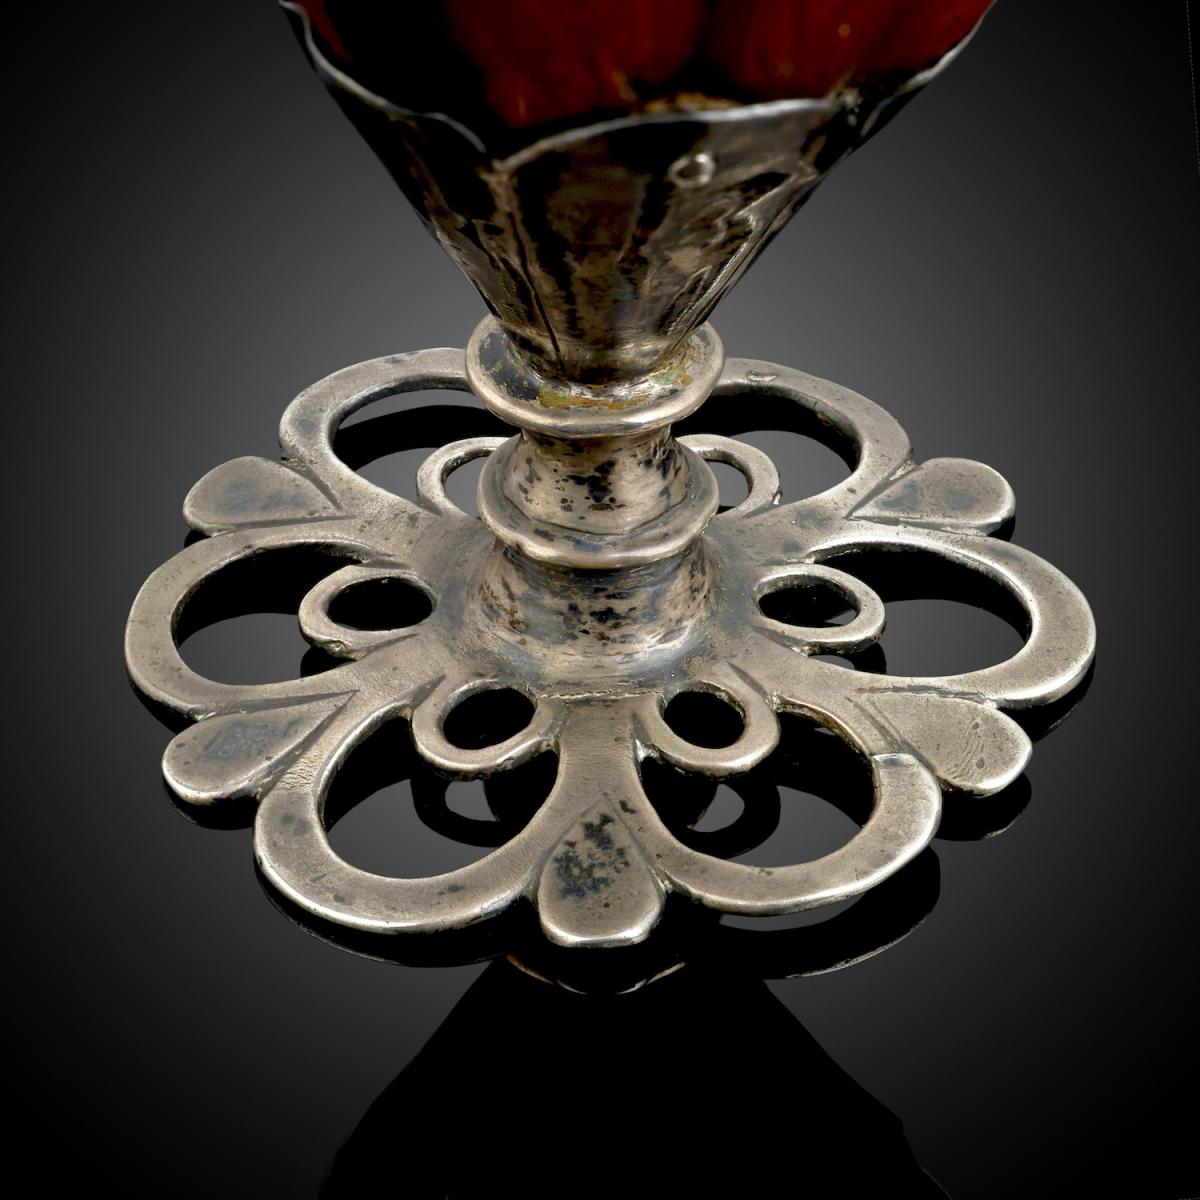 Spanish Colonial silver mounted Cocquilla nut goblet